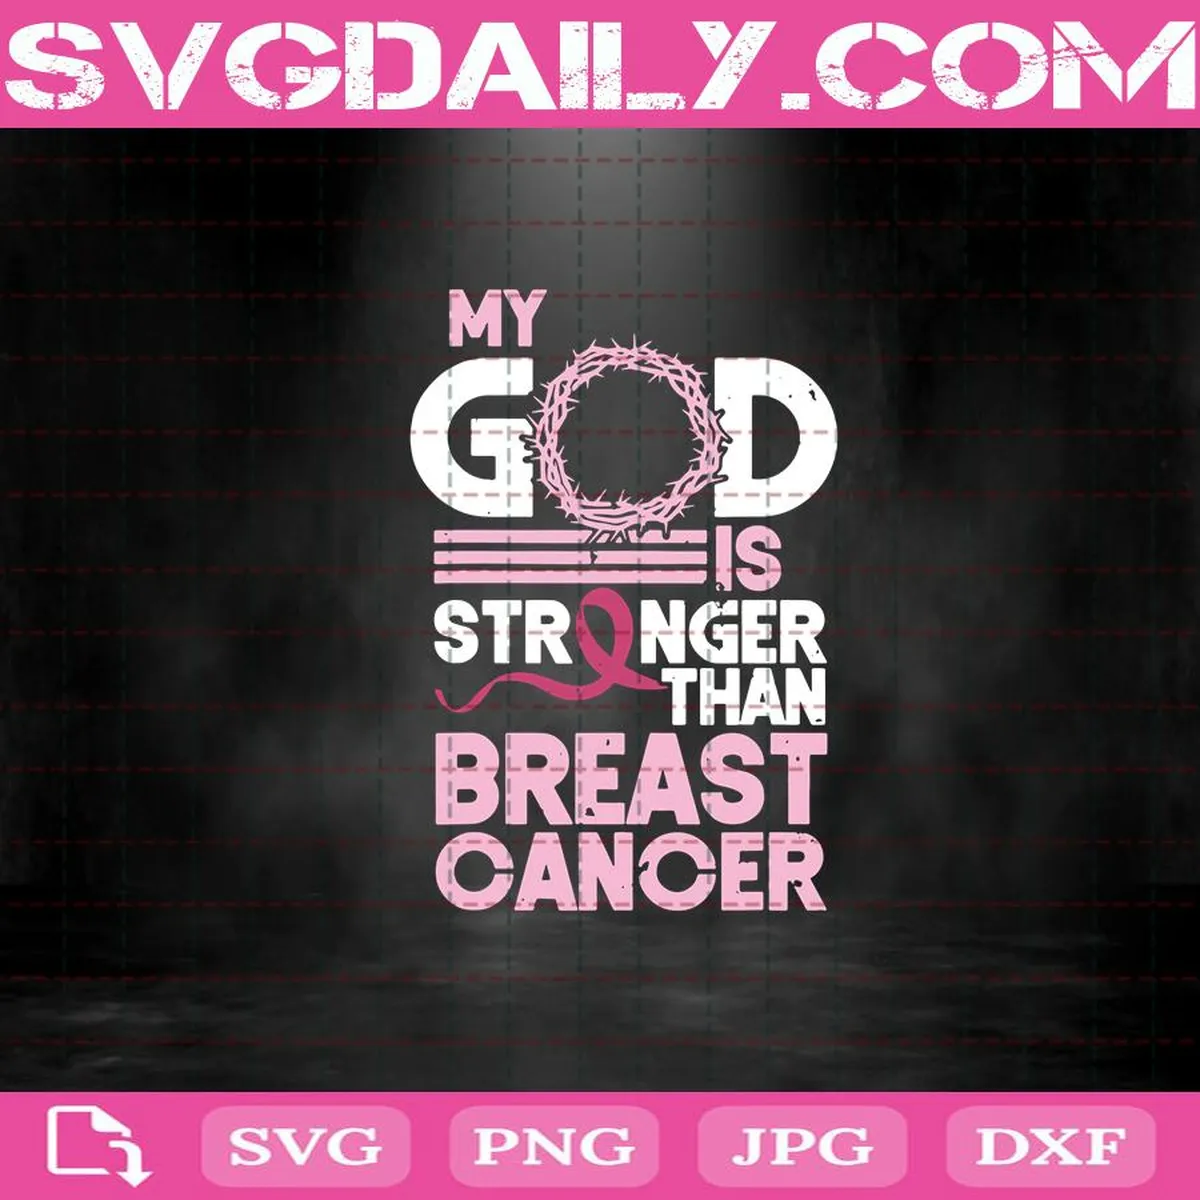 My God Is Stronger Than Breast Cancer Svg, Trending Svg, My God Svg, Stronger Svg, Breast Cancer Svg, Best Cancer Awareness Svg, Cancer Svg